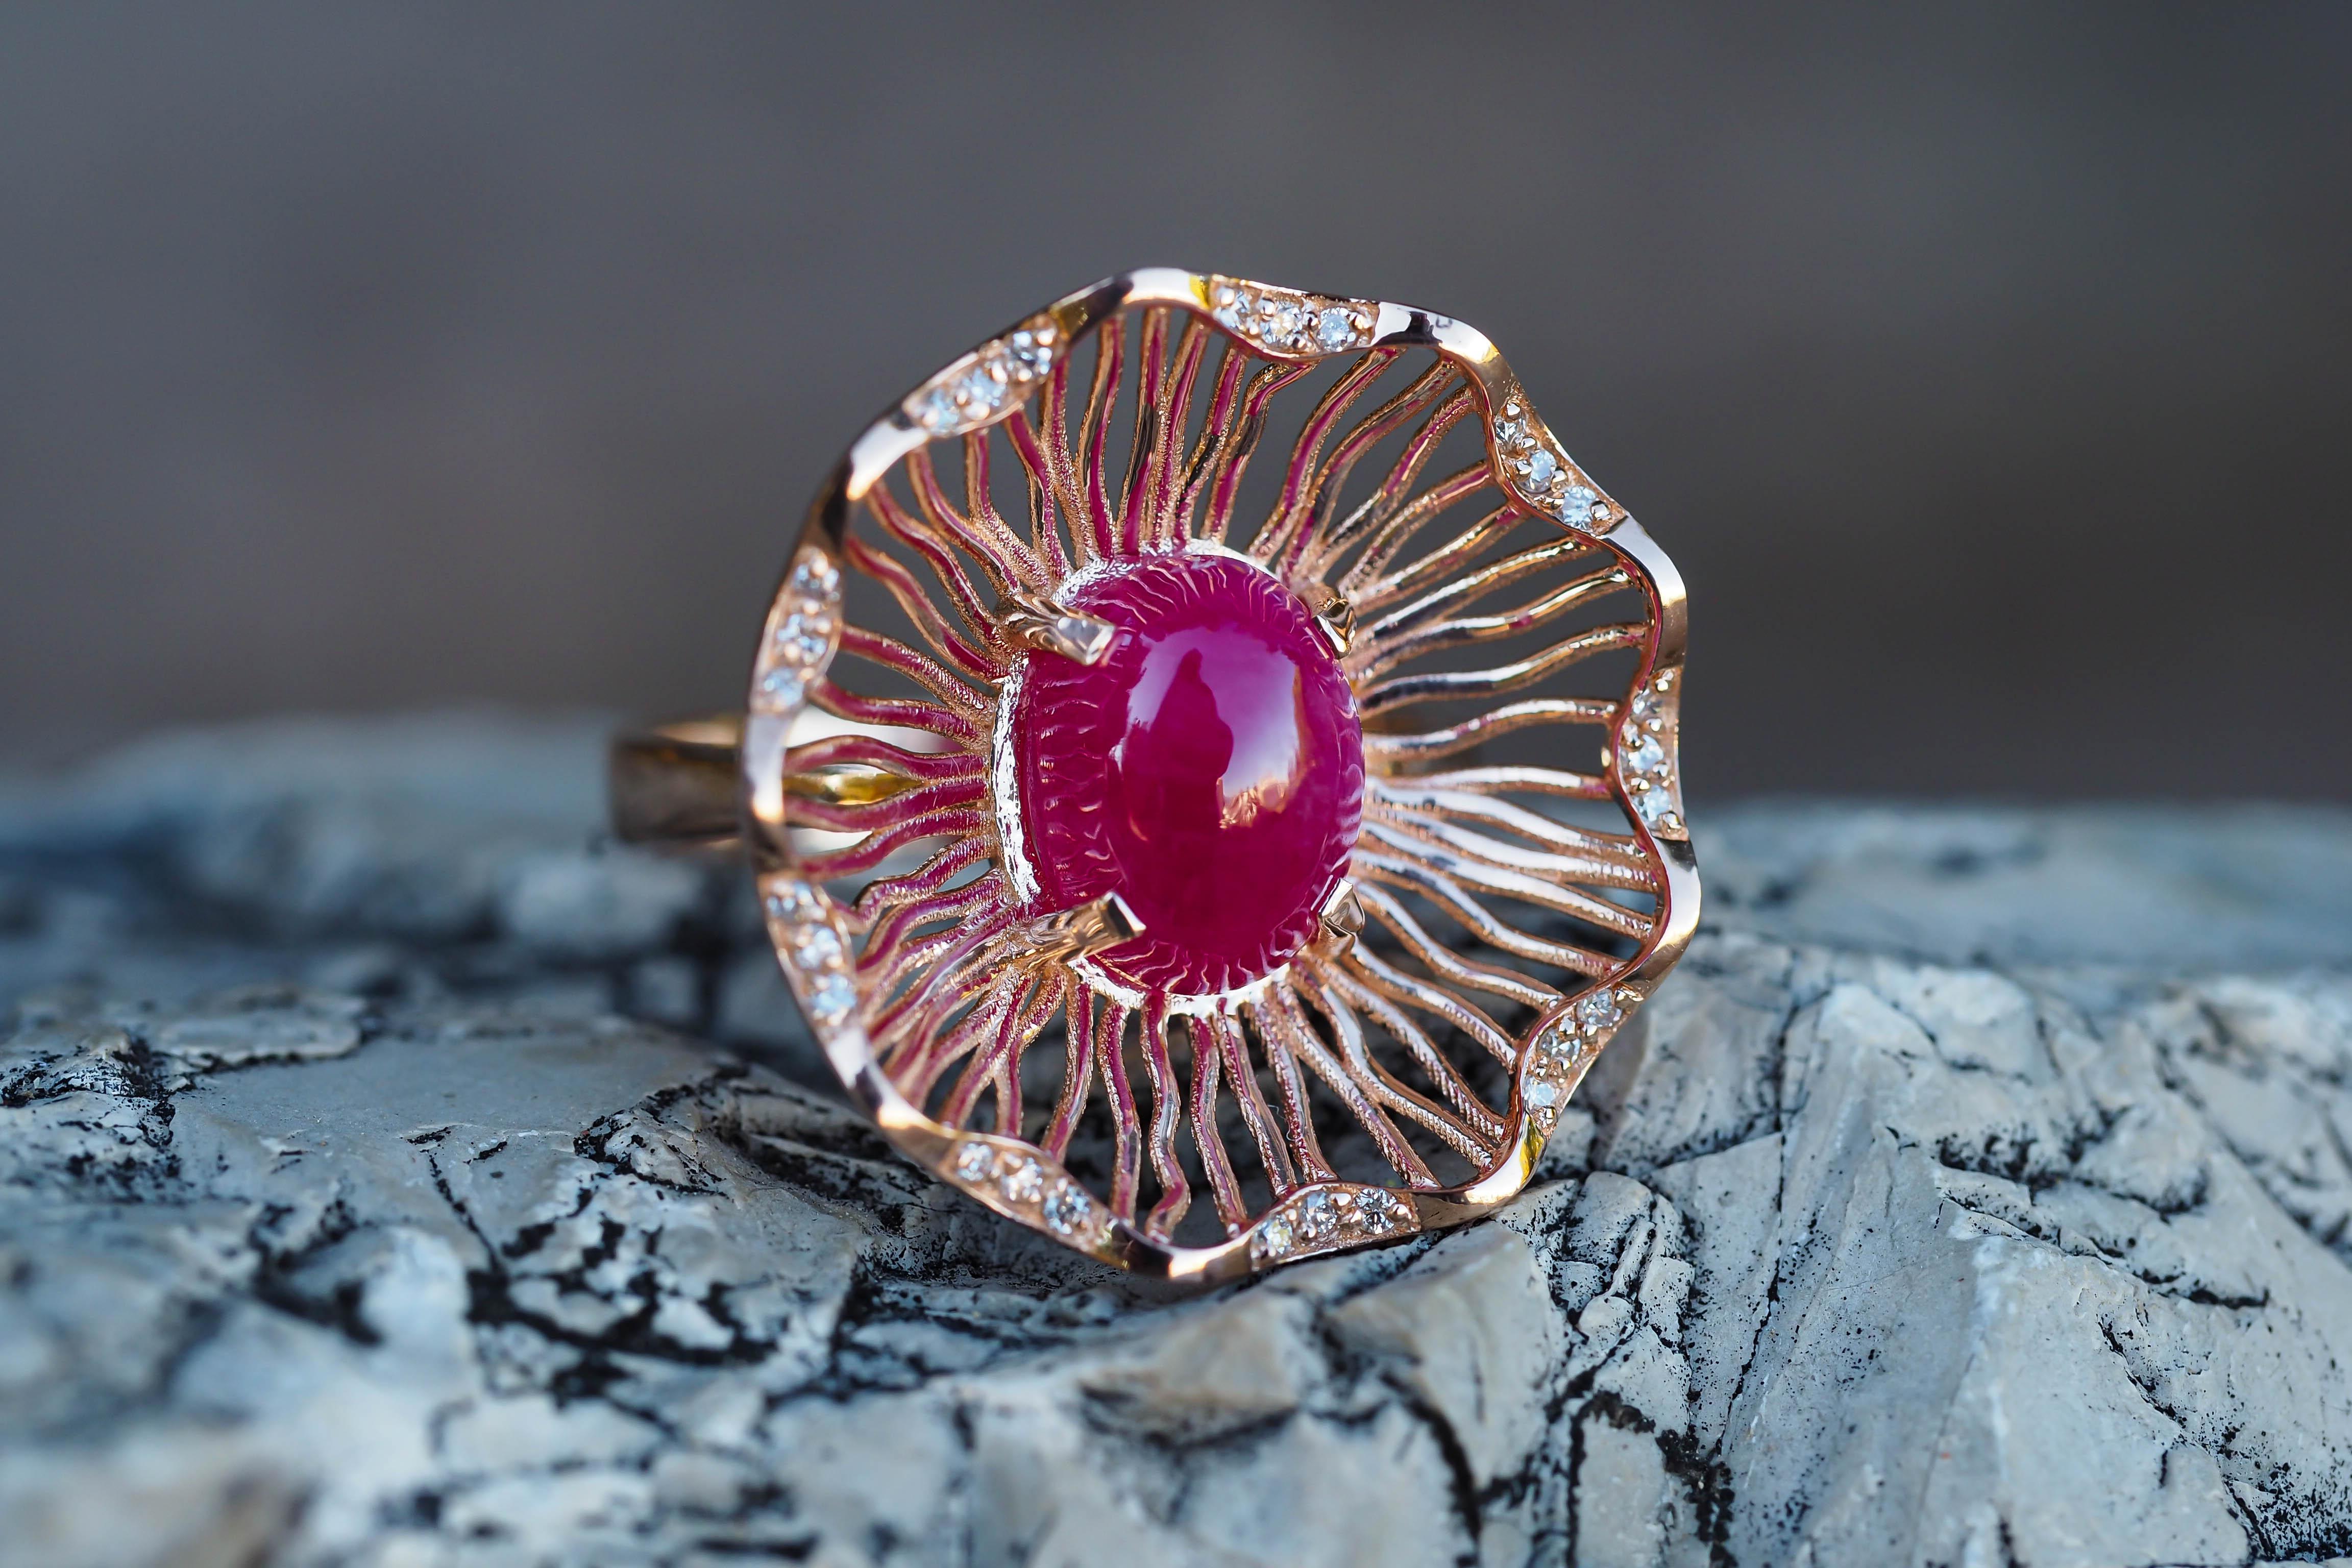 Women's Pink Gold Ring with Ruby and Diamonds, Vintage Style Ring with Ruby Cabochon